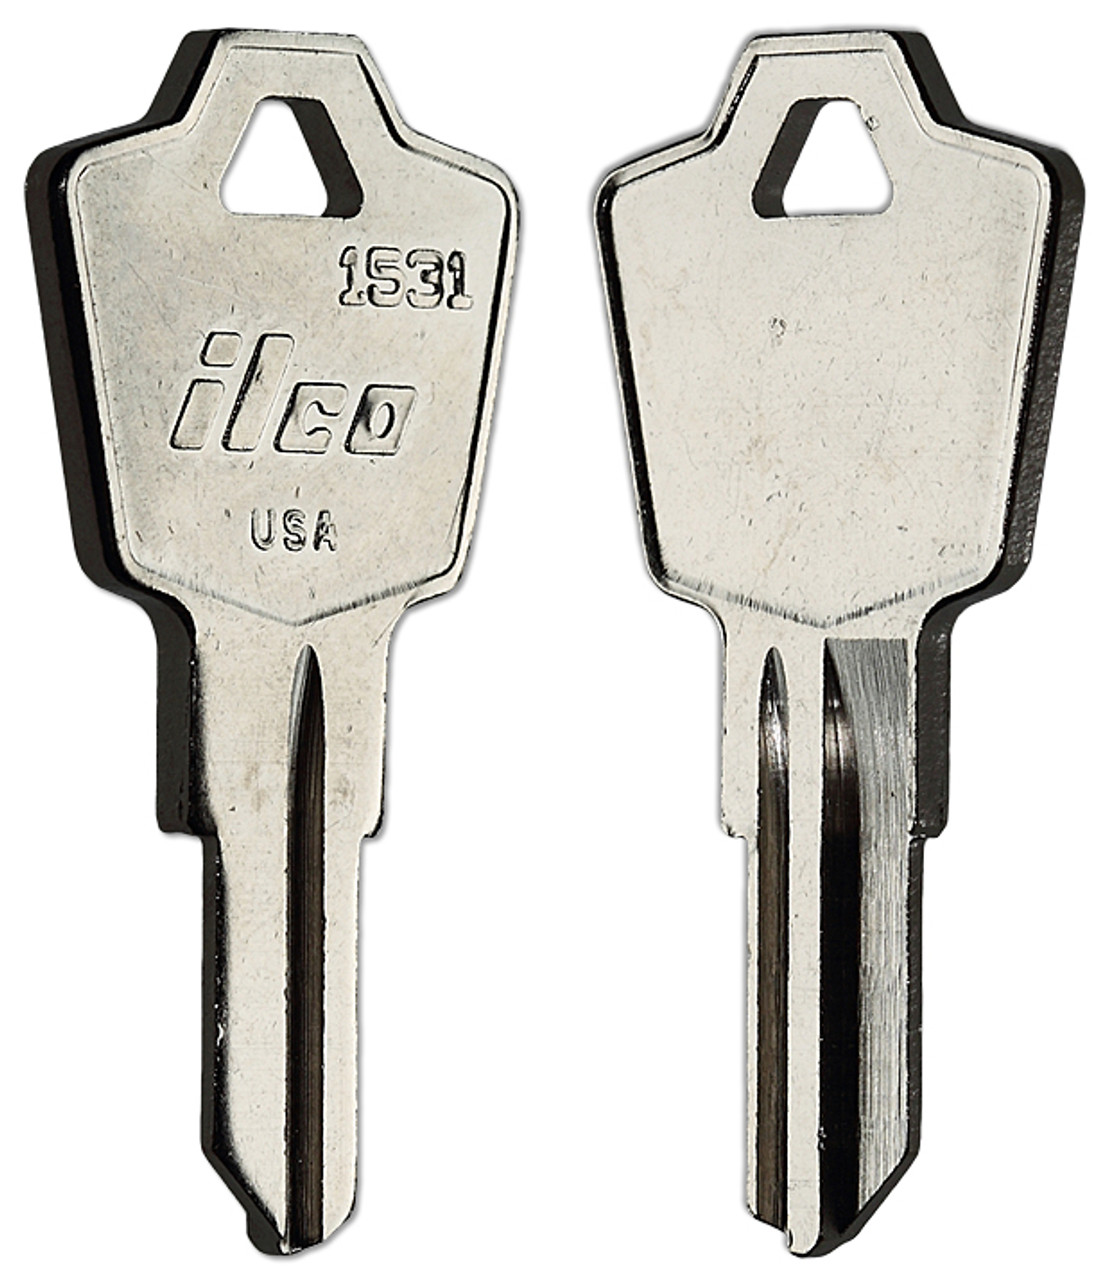 1X KEY CUT to Code CL001 Electrical Key for Cabinets Switchboards